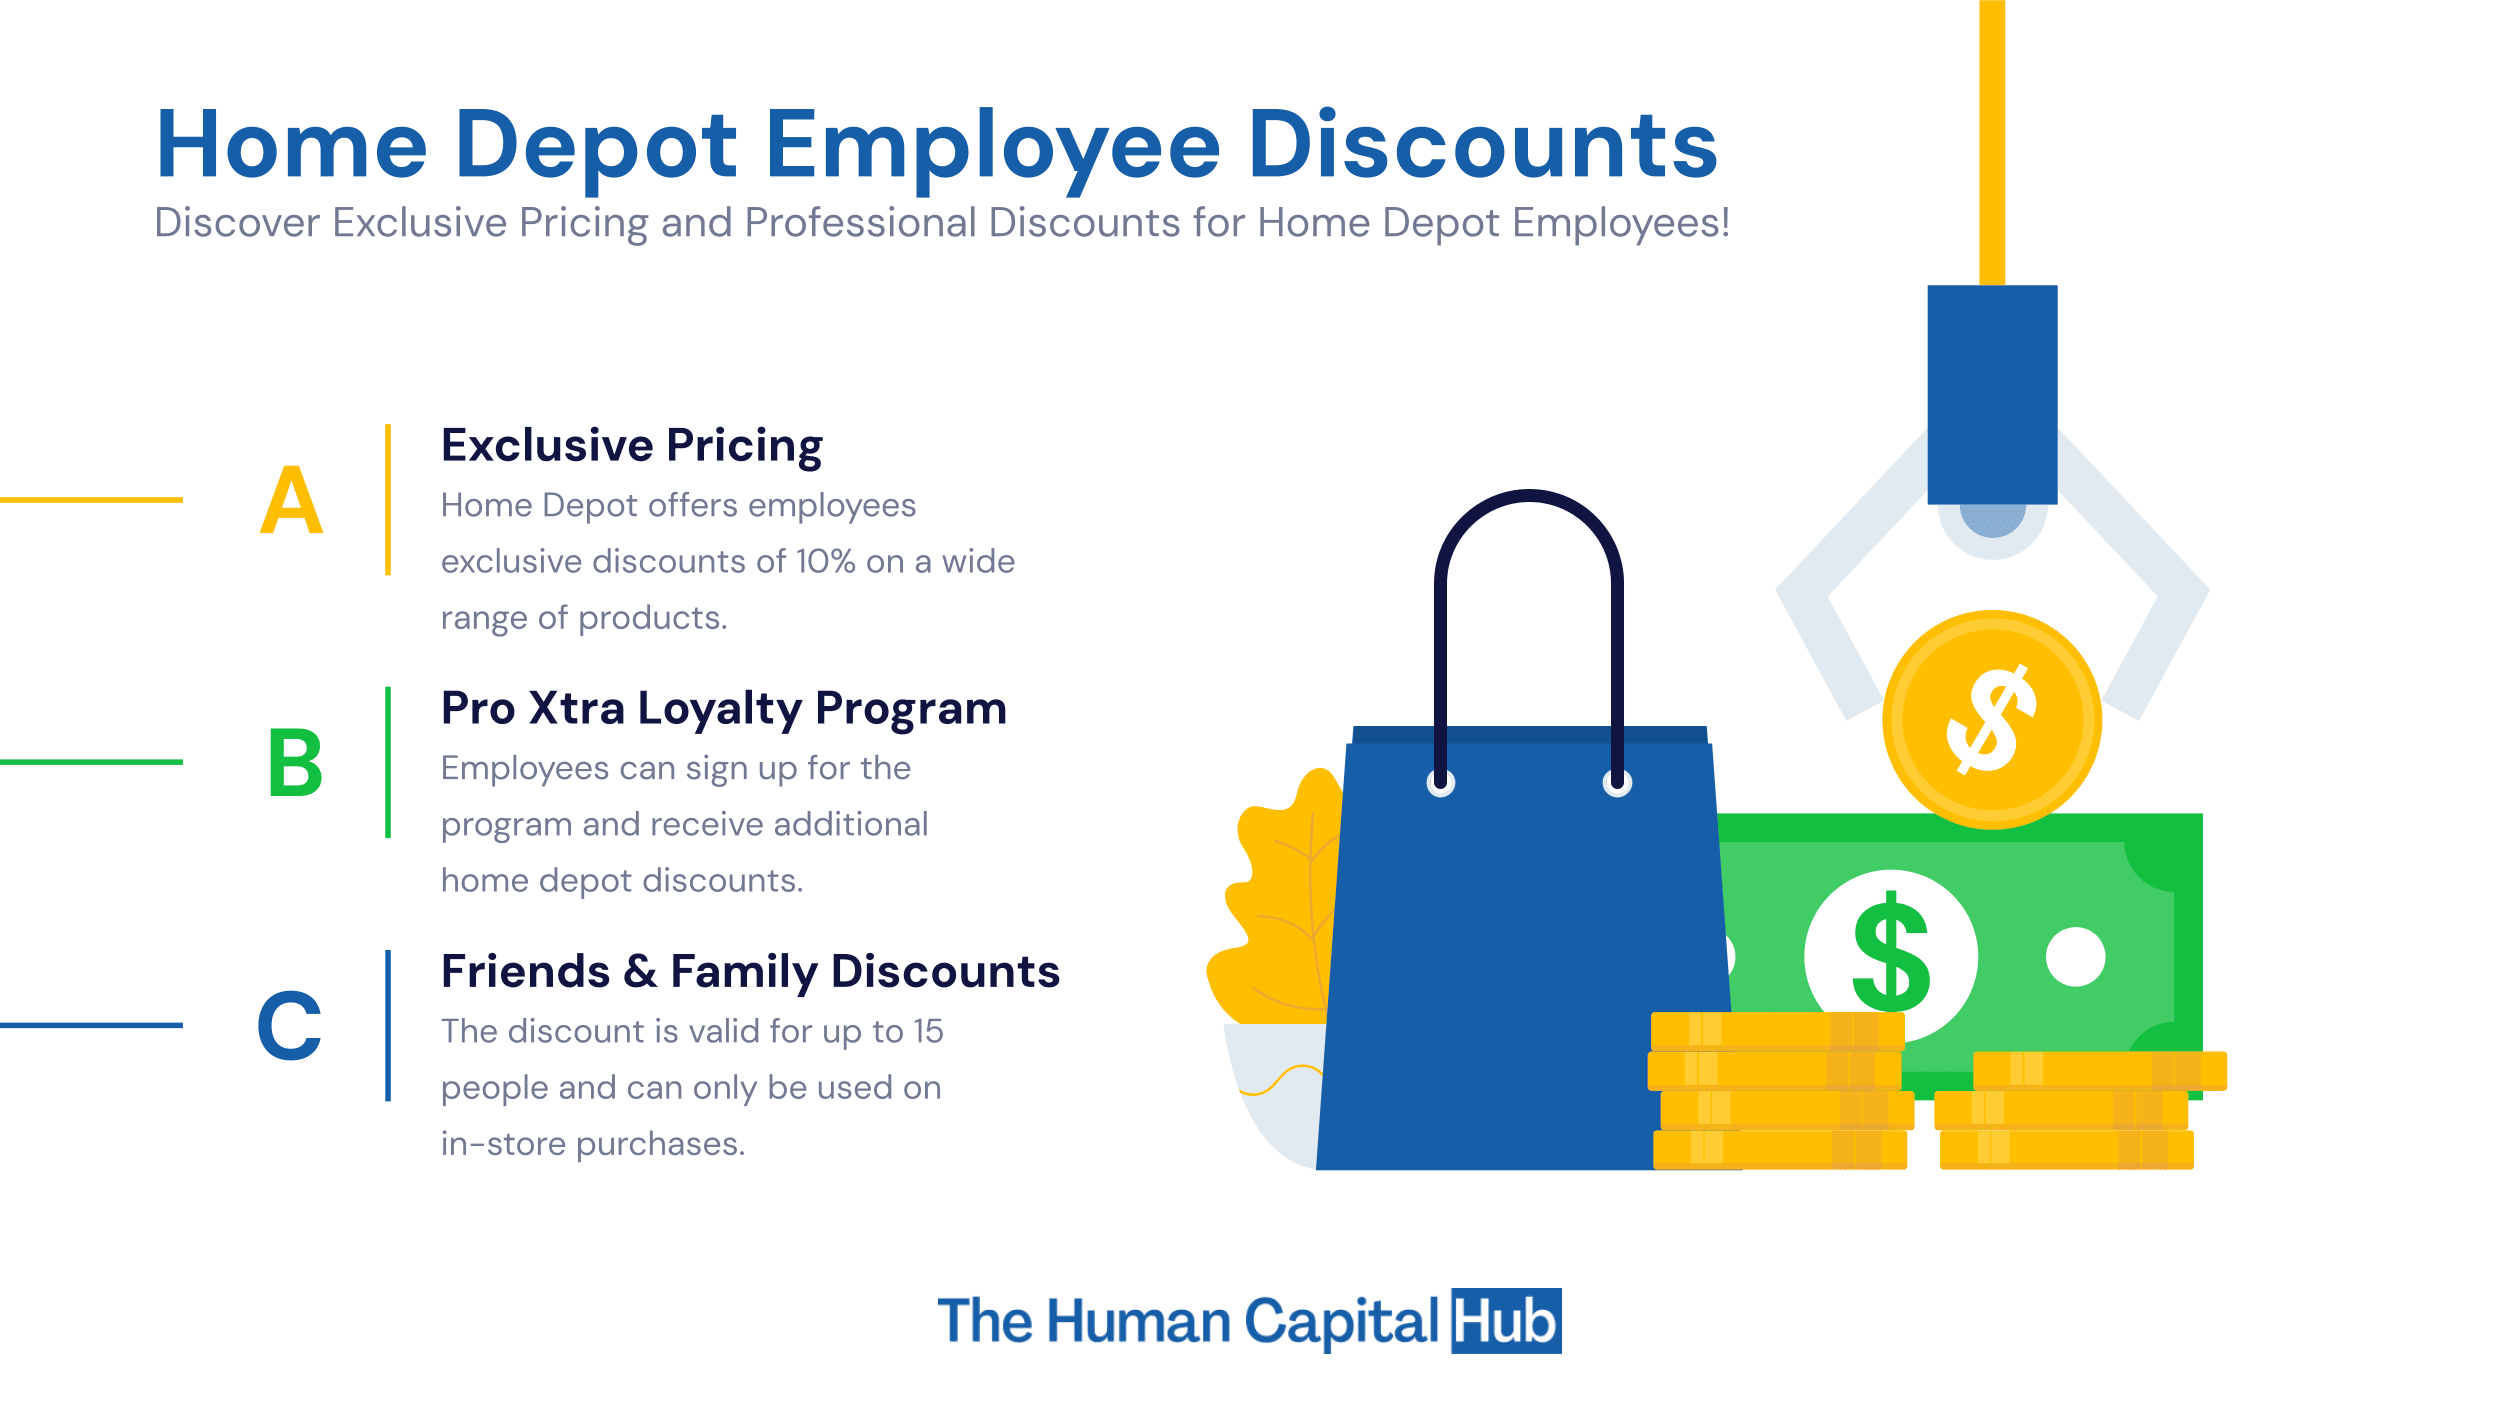 Home Depot Discounts for Employees